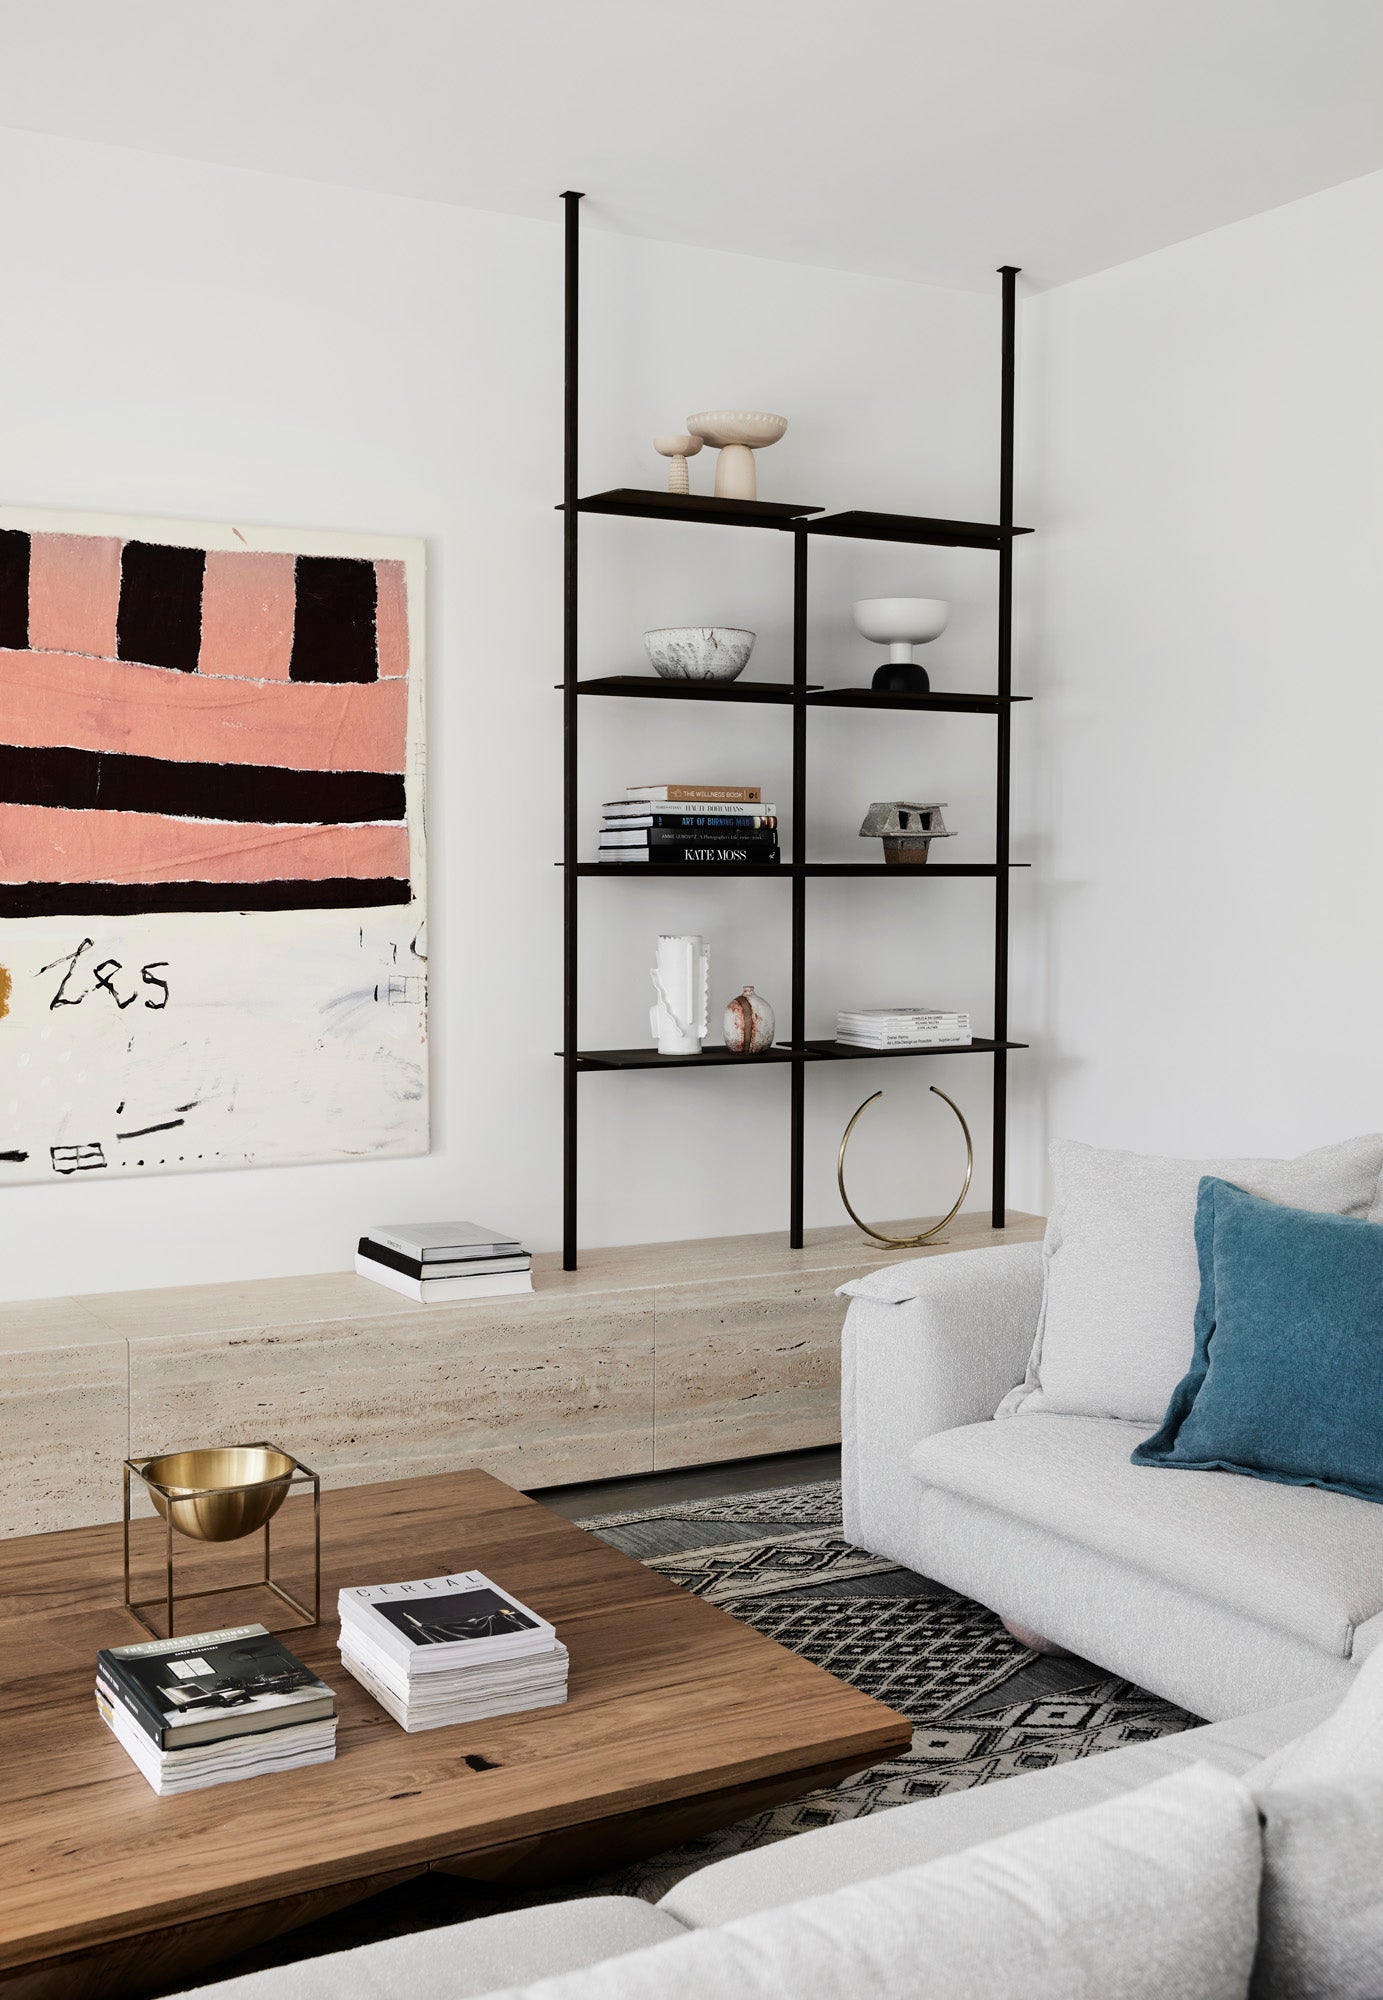 Insights from a Top Interior Design Studio on How to Express with Less